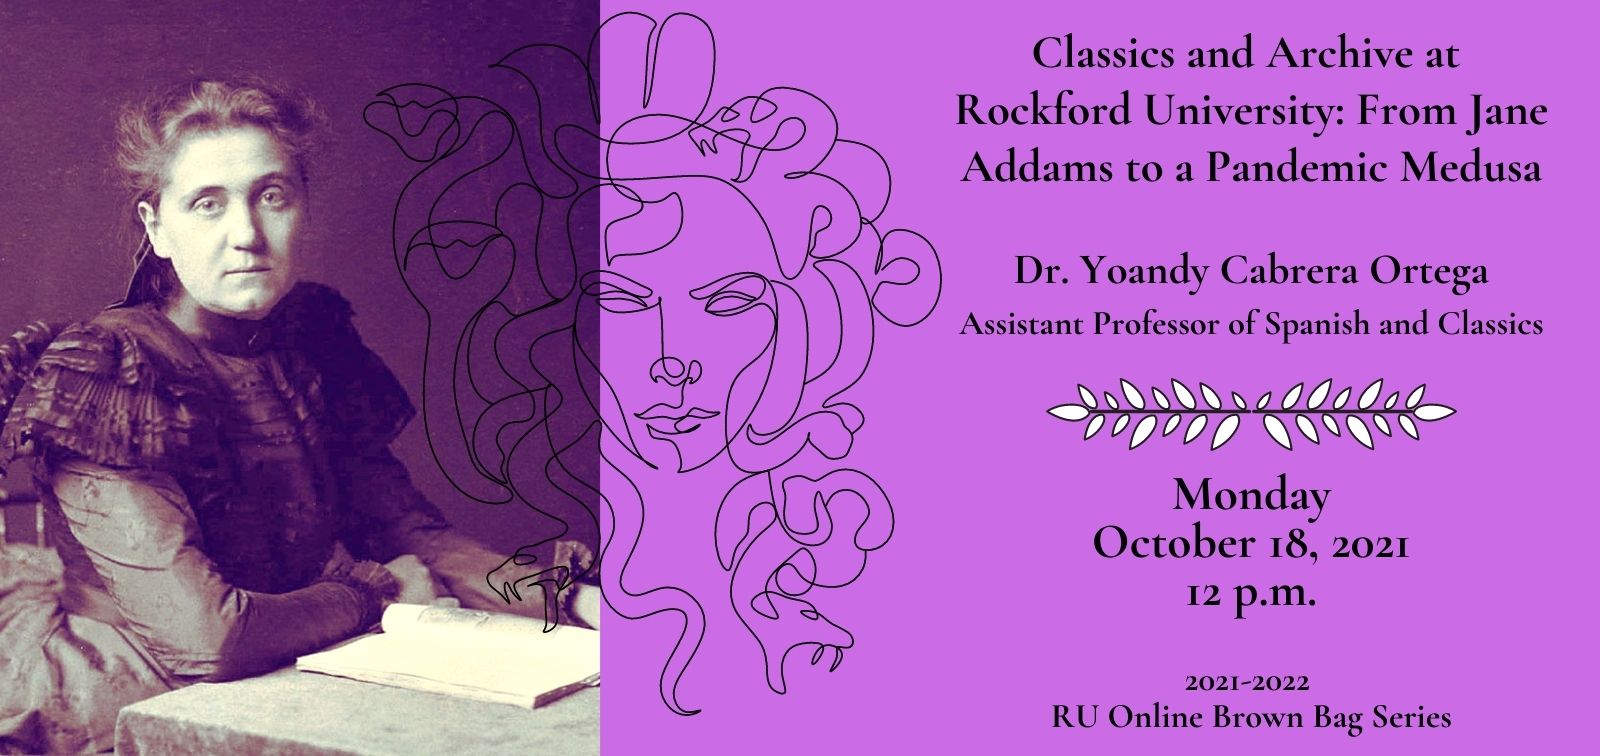 Image for Fall 2021 Brown Bag Presentation, "Classics and Archive at Rockford University: From Jane Addams to a Pandemic Medusa" webinar